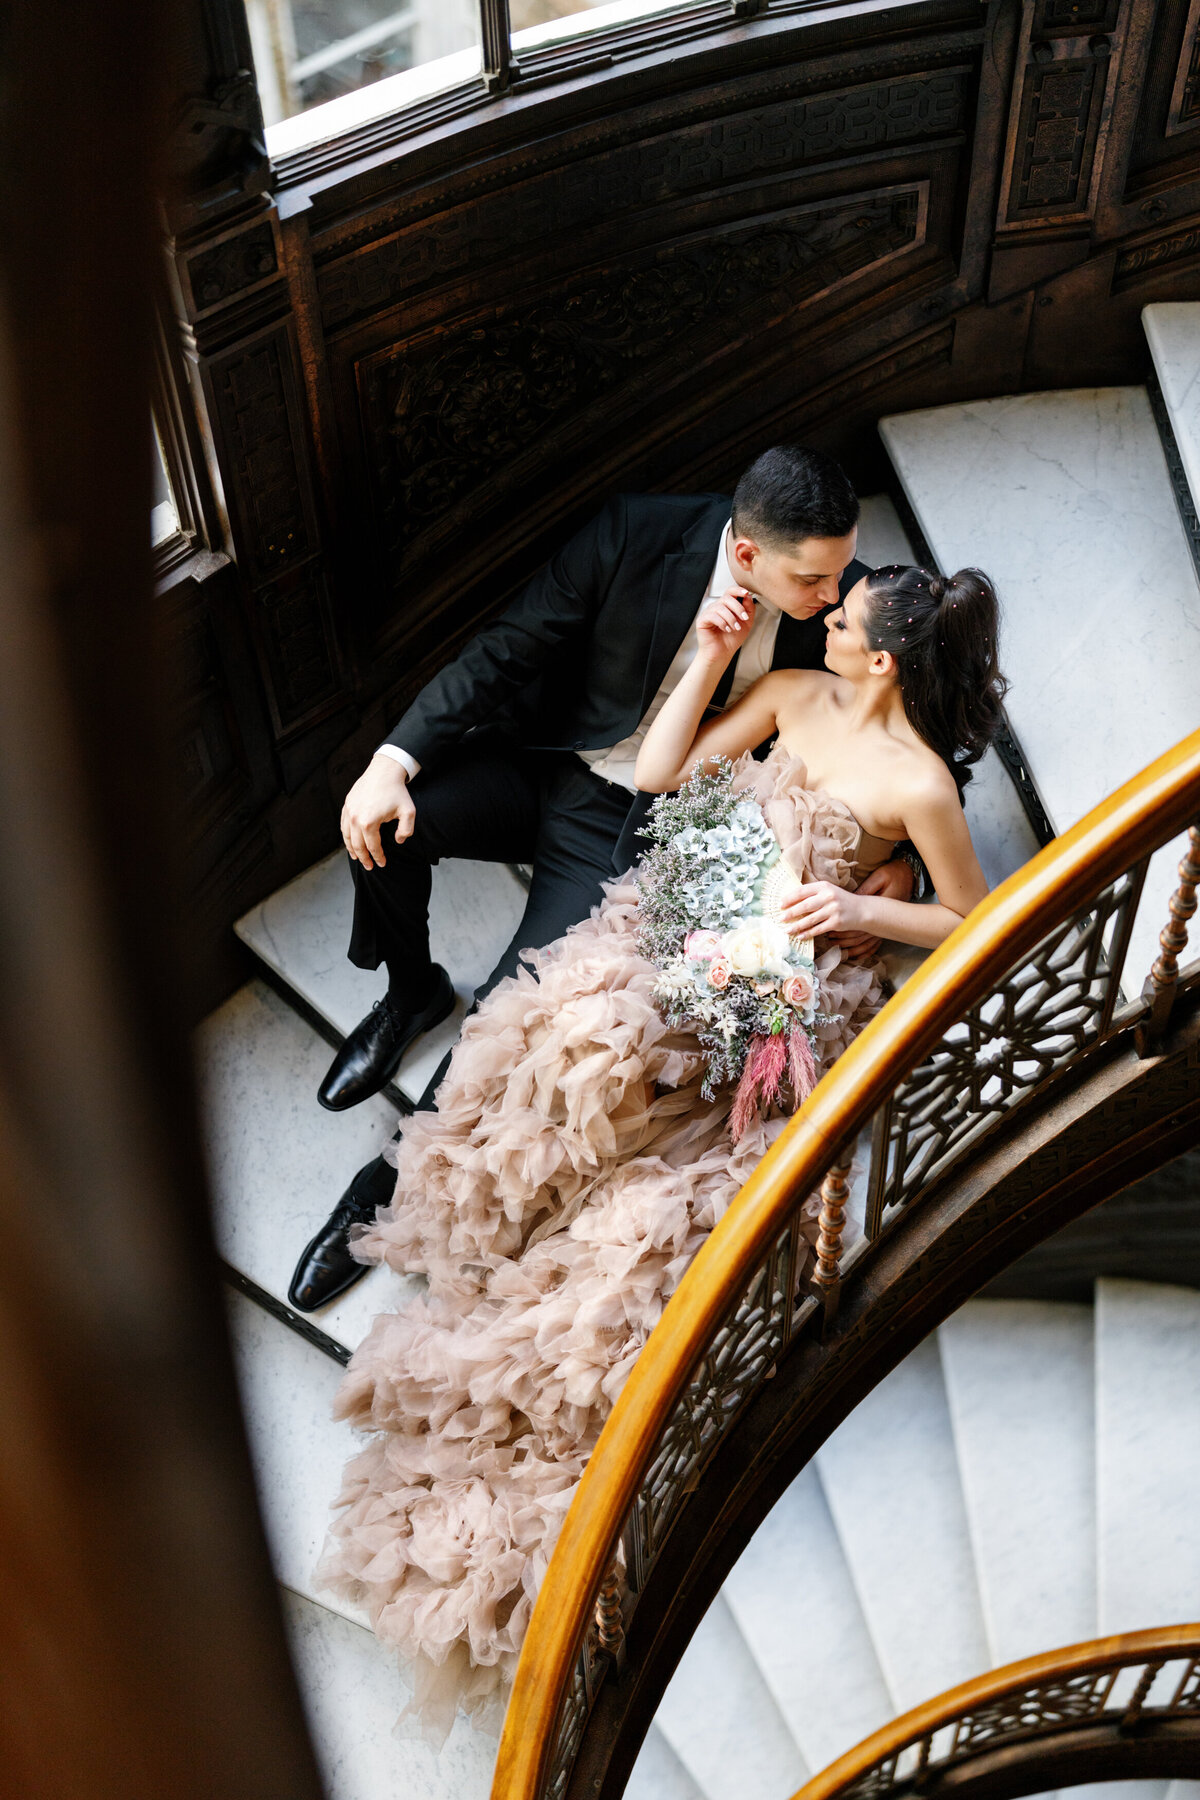 Aspen-Avenue-Chicago-Wedding-Photographer-Rookery-Engagement-Session-Histoircal-Stairs-Moody-Dramatic-Magazine-Unique-Gown-Stemming-From-Love-Emily-Rae-Bridal-Hair-FAV-35